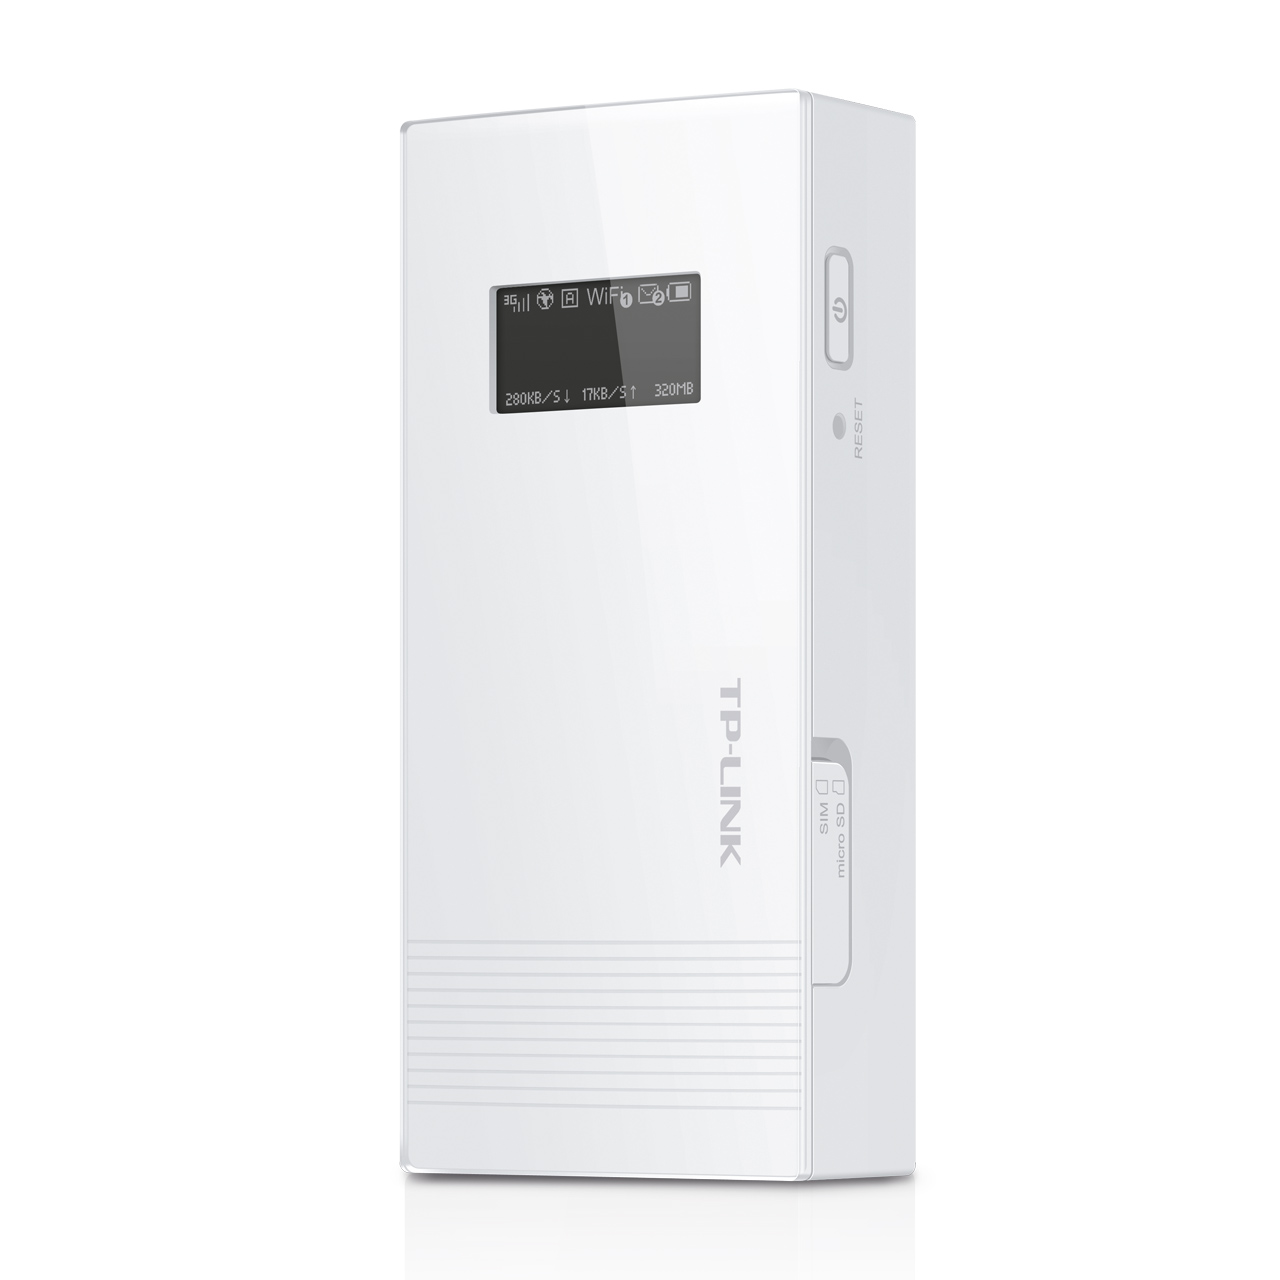 TP-Link M5360 Mobile WiFi Power Bank